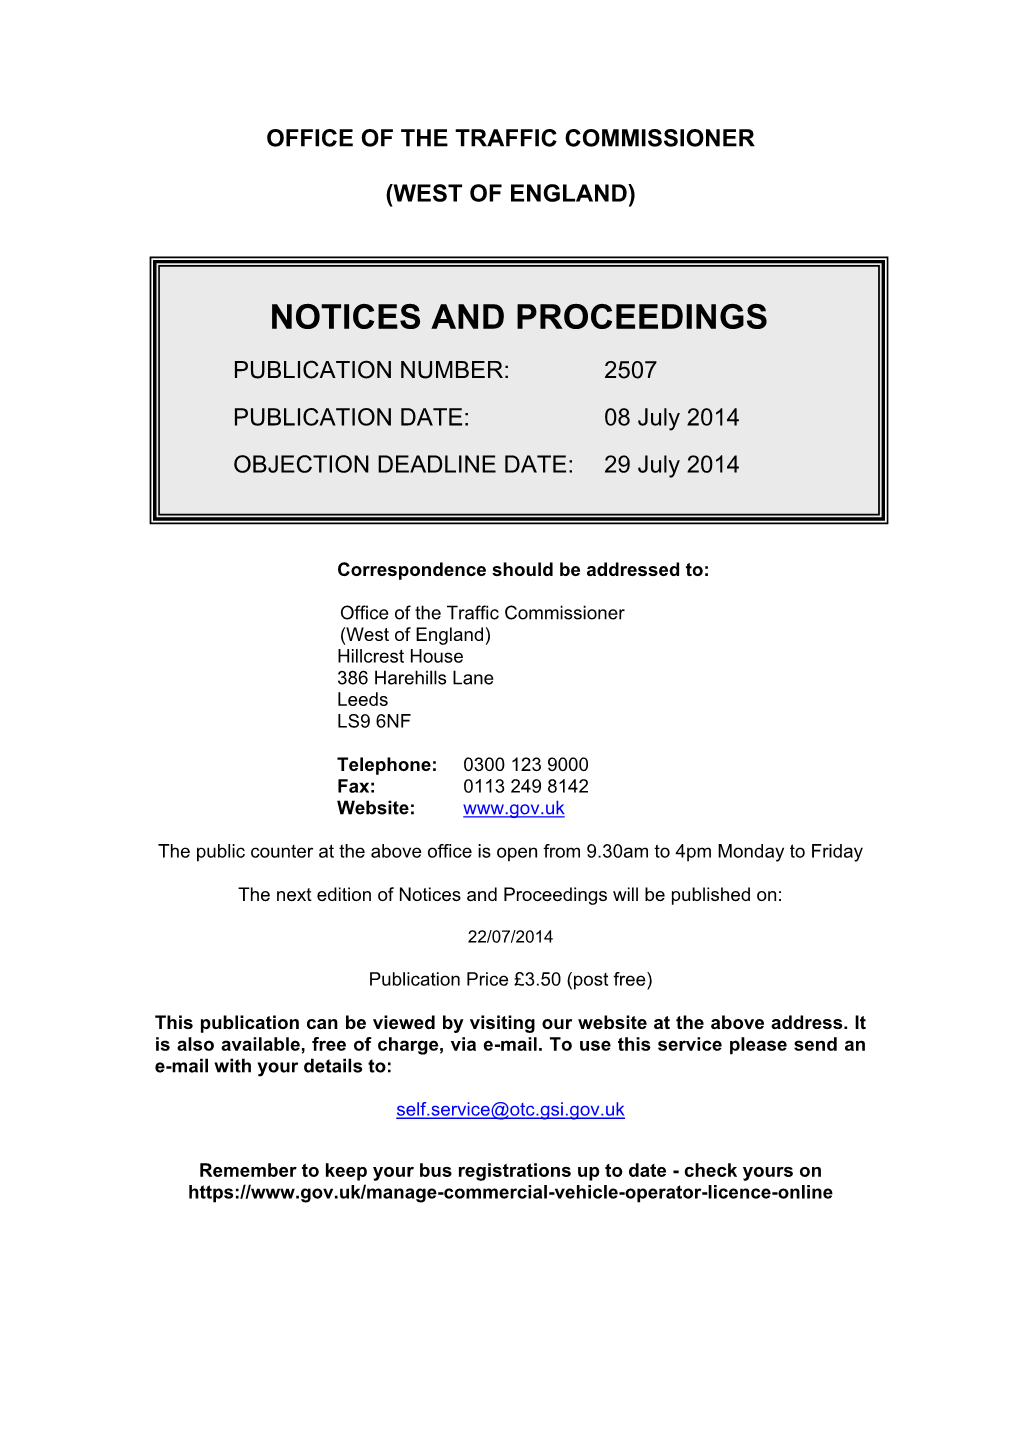 Notices and Proceedings 8 July 2014